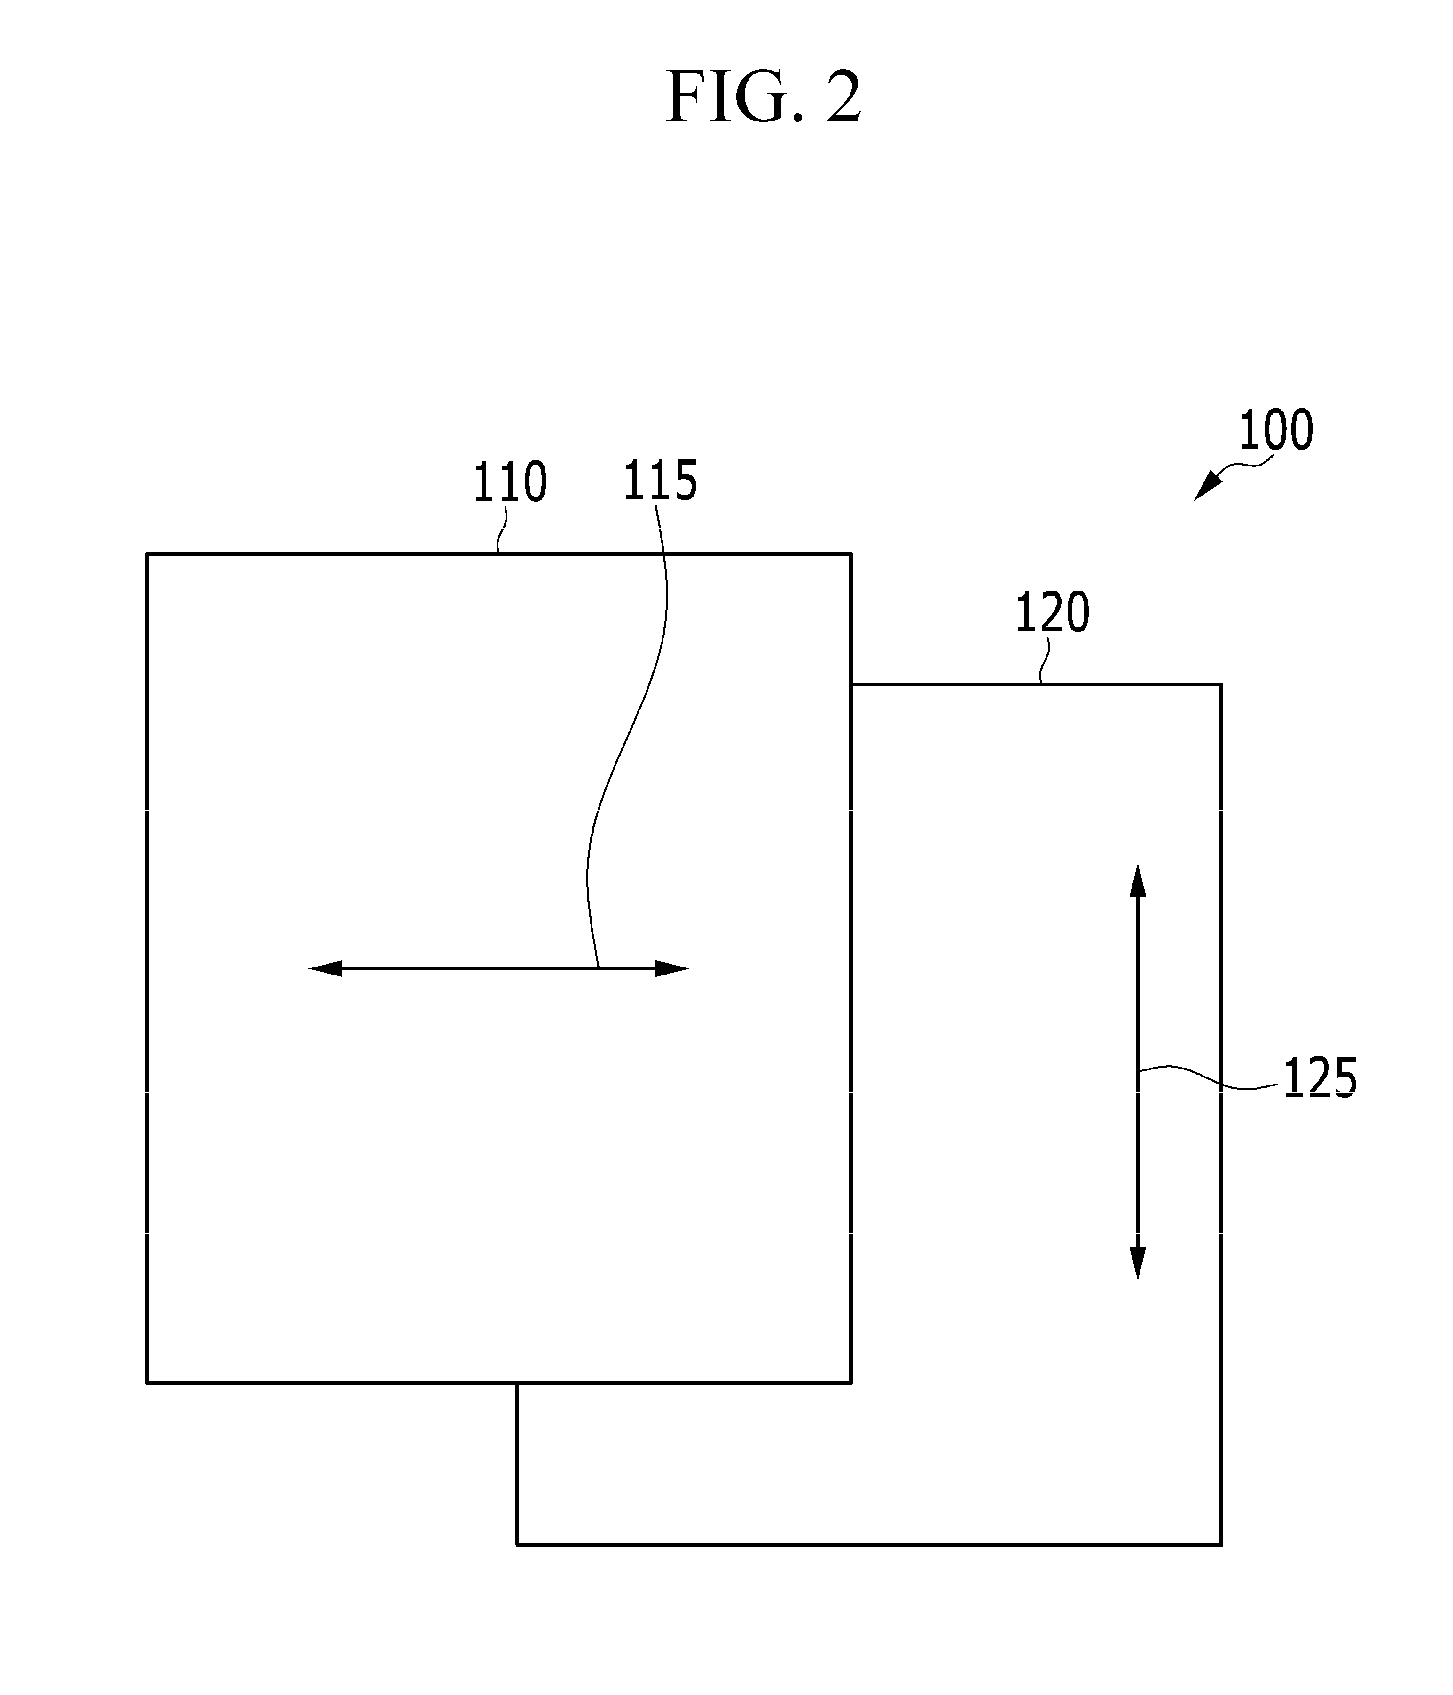 Compensation film and optical film, and display device